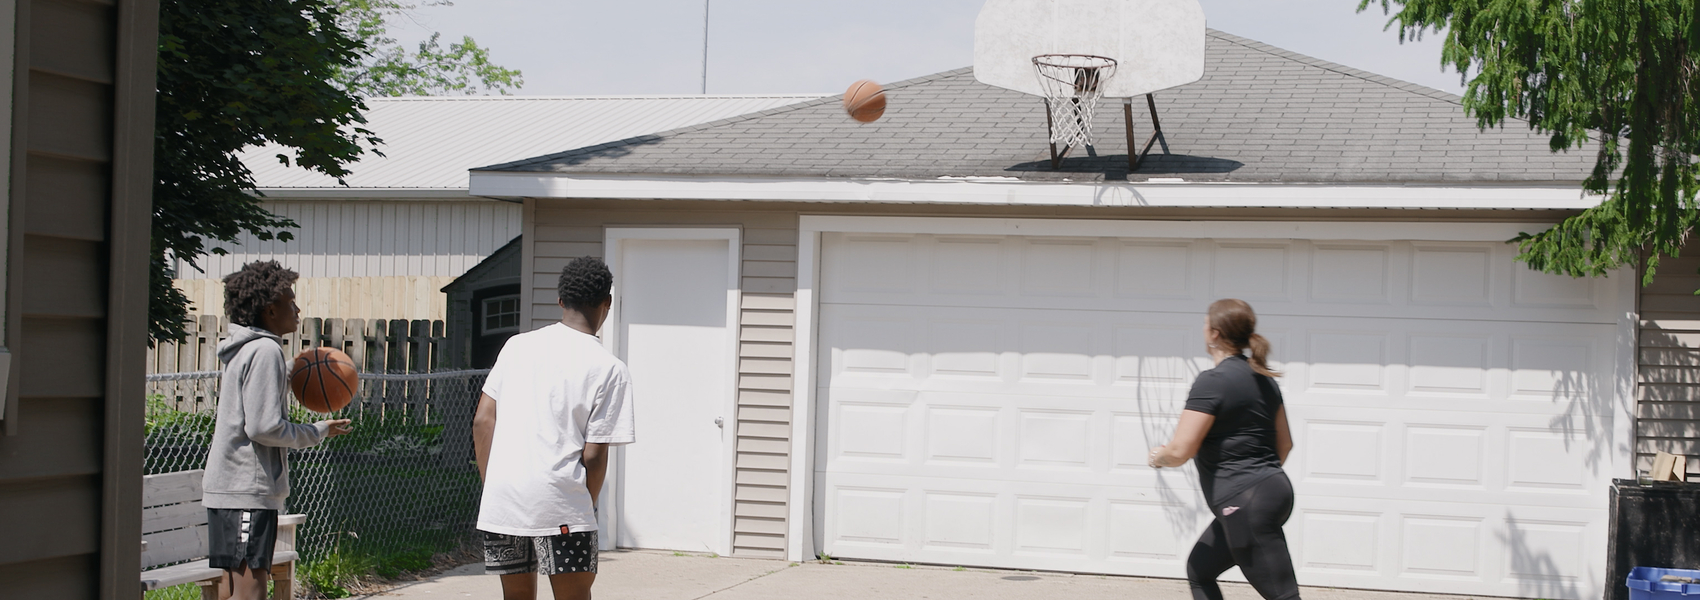 Foster mom plays basketball in the driveway with two foster youth boys